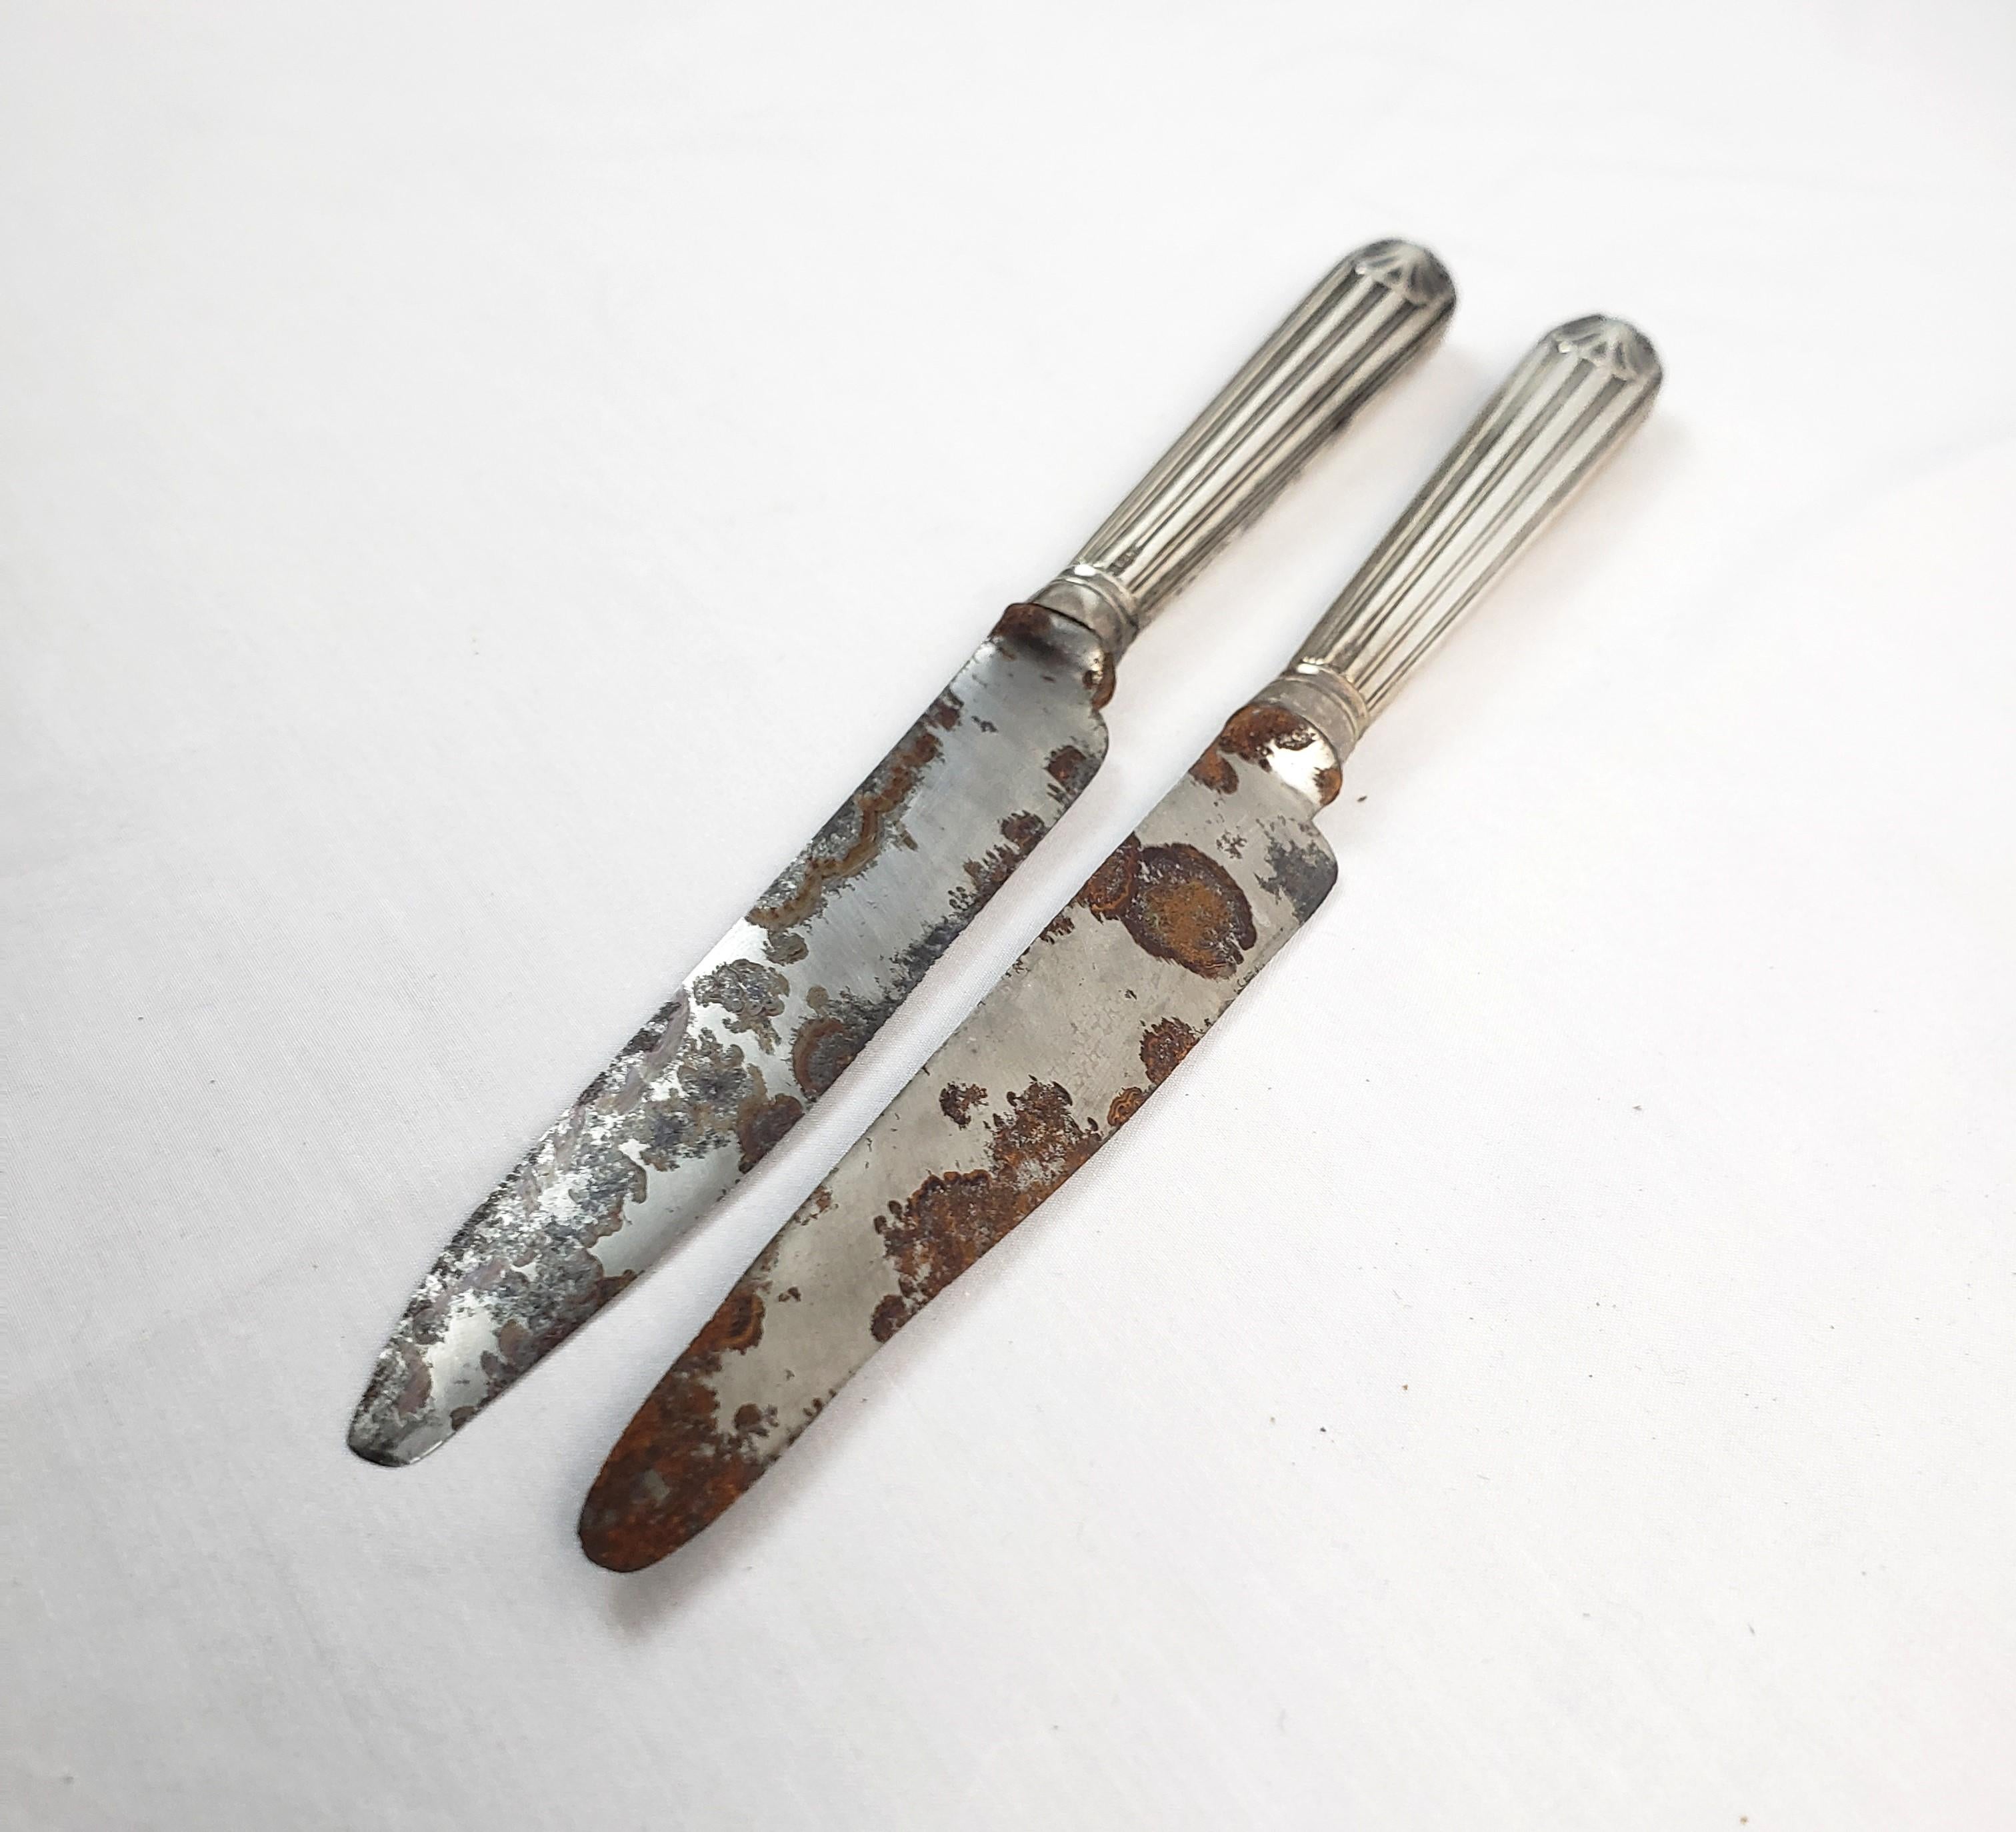 This pair of antique knives were made by the renowned silversmith, Paul Storr of England and date to approximately 1807 and done in the period Georgian style. The handles are done in sterling silver with ribbed sides and scalloped details at the